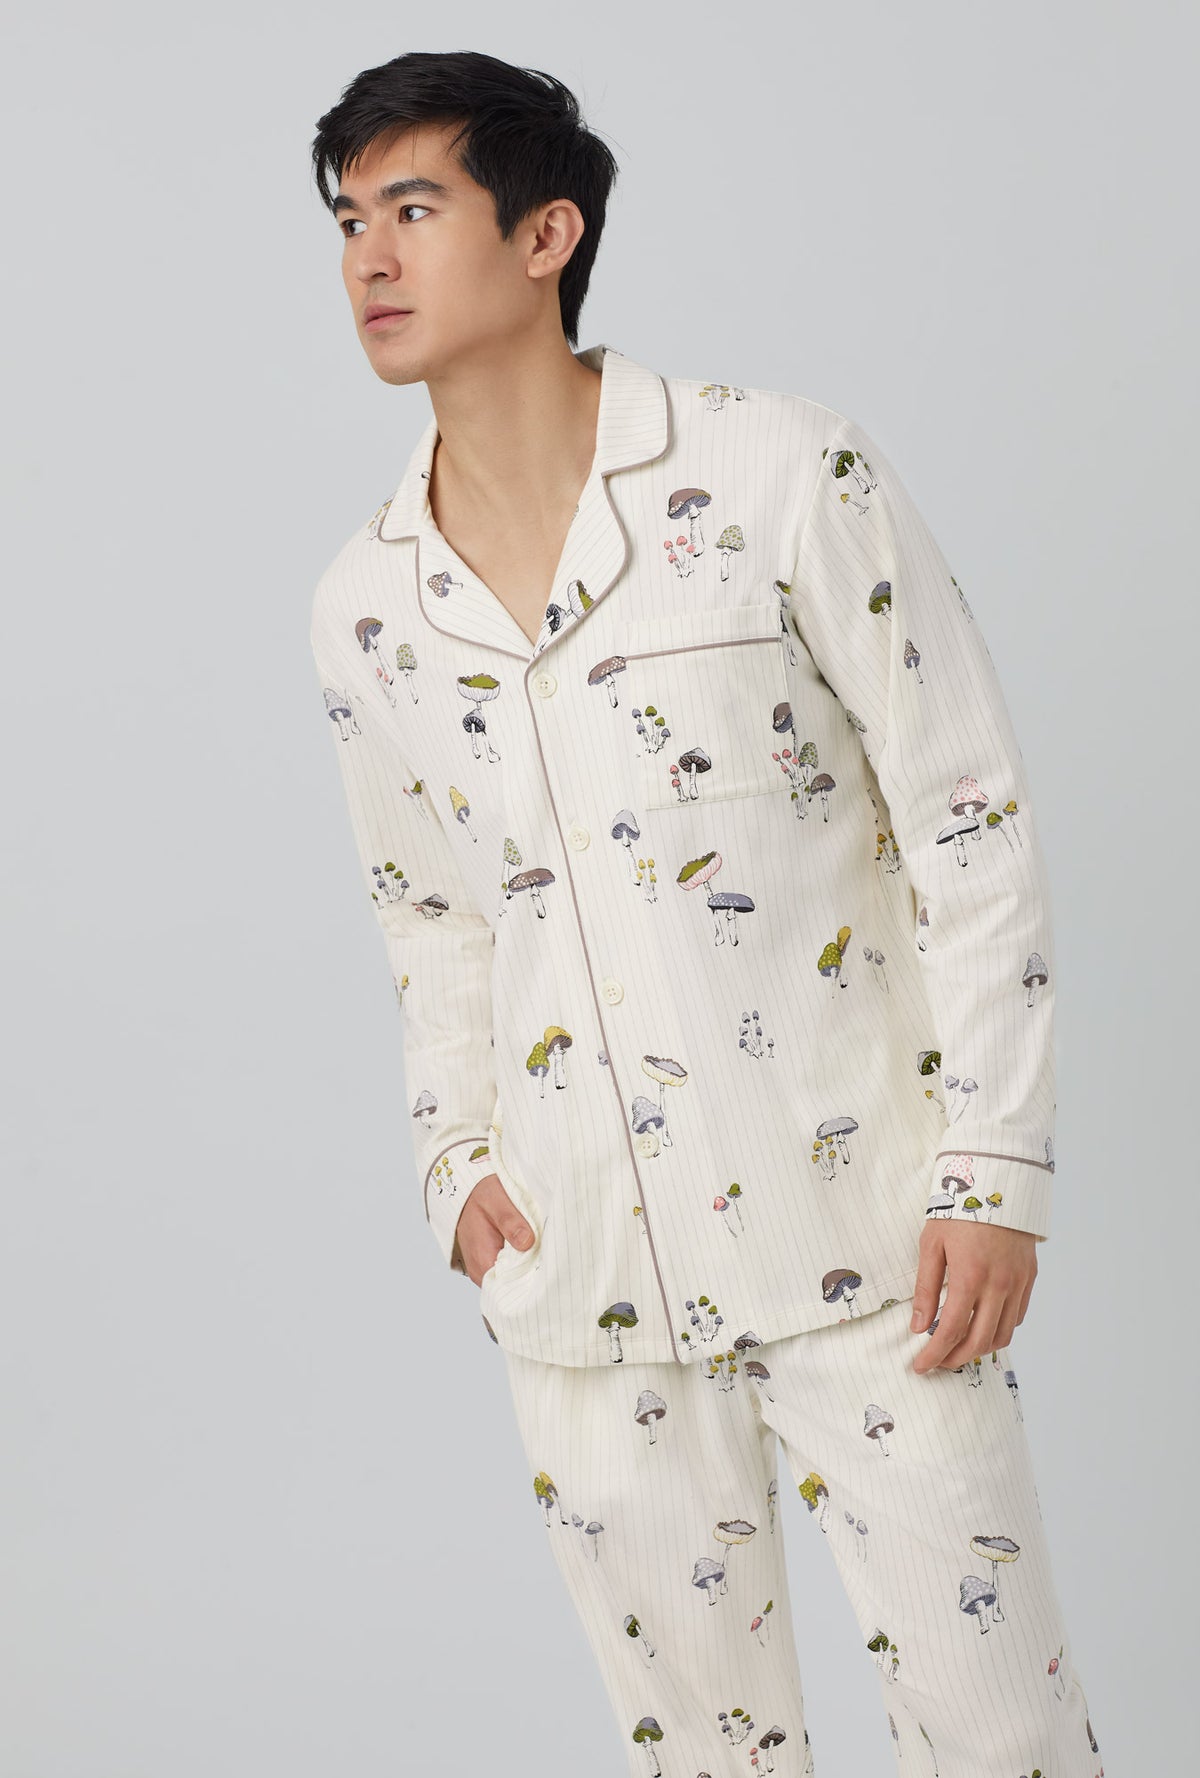 A men wearing white Long Sleeve Classic Stretch Jersey PJ Set with Wild Mushrooms print